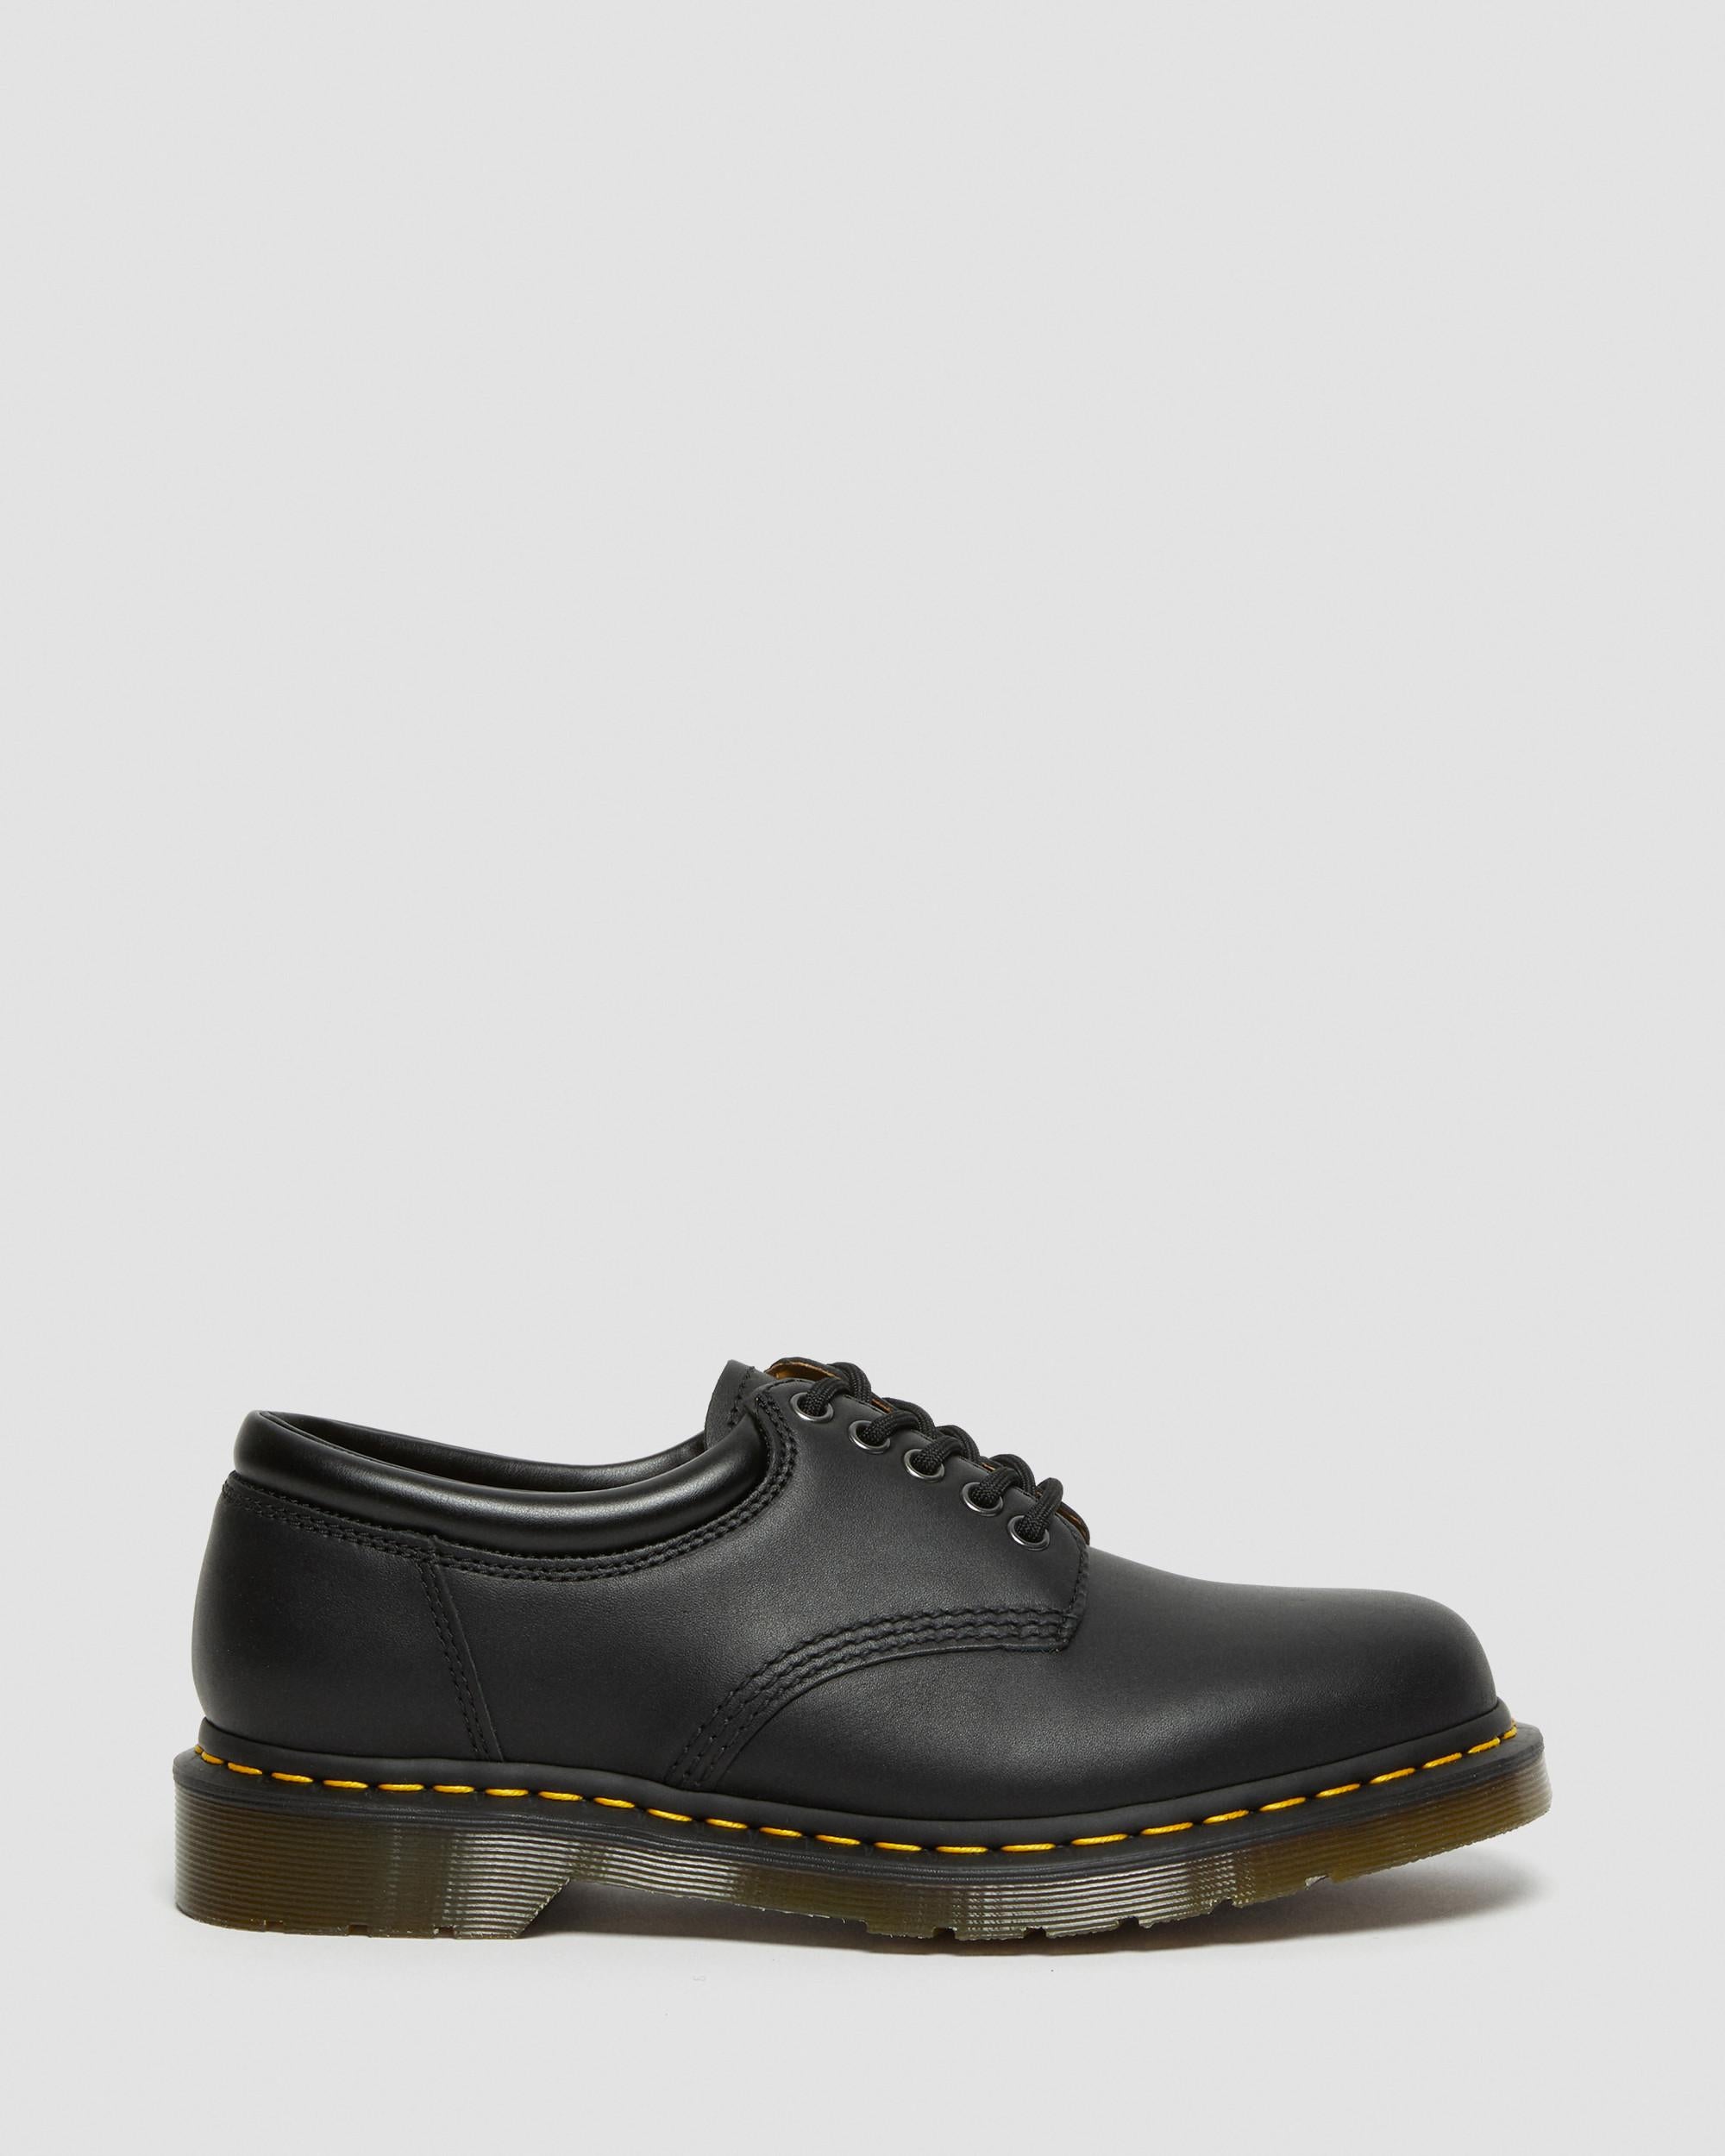 8053 Nappa Leather Shoes